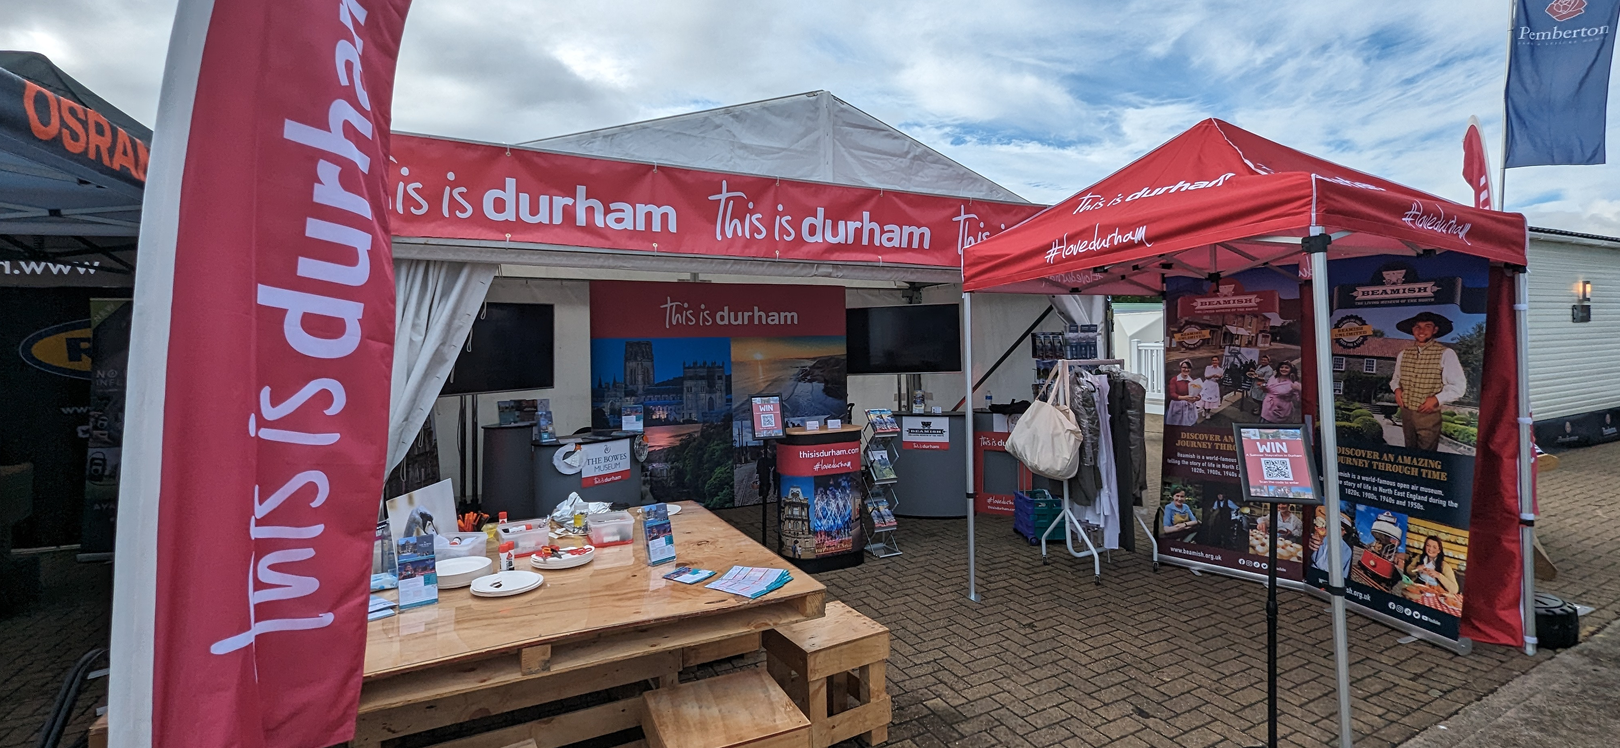 thisisdurham.com stand at the Great Yorkshire Show